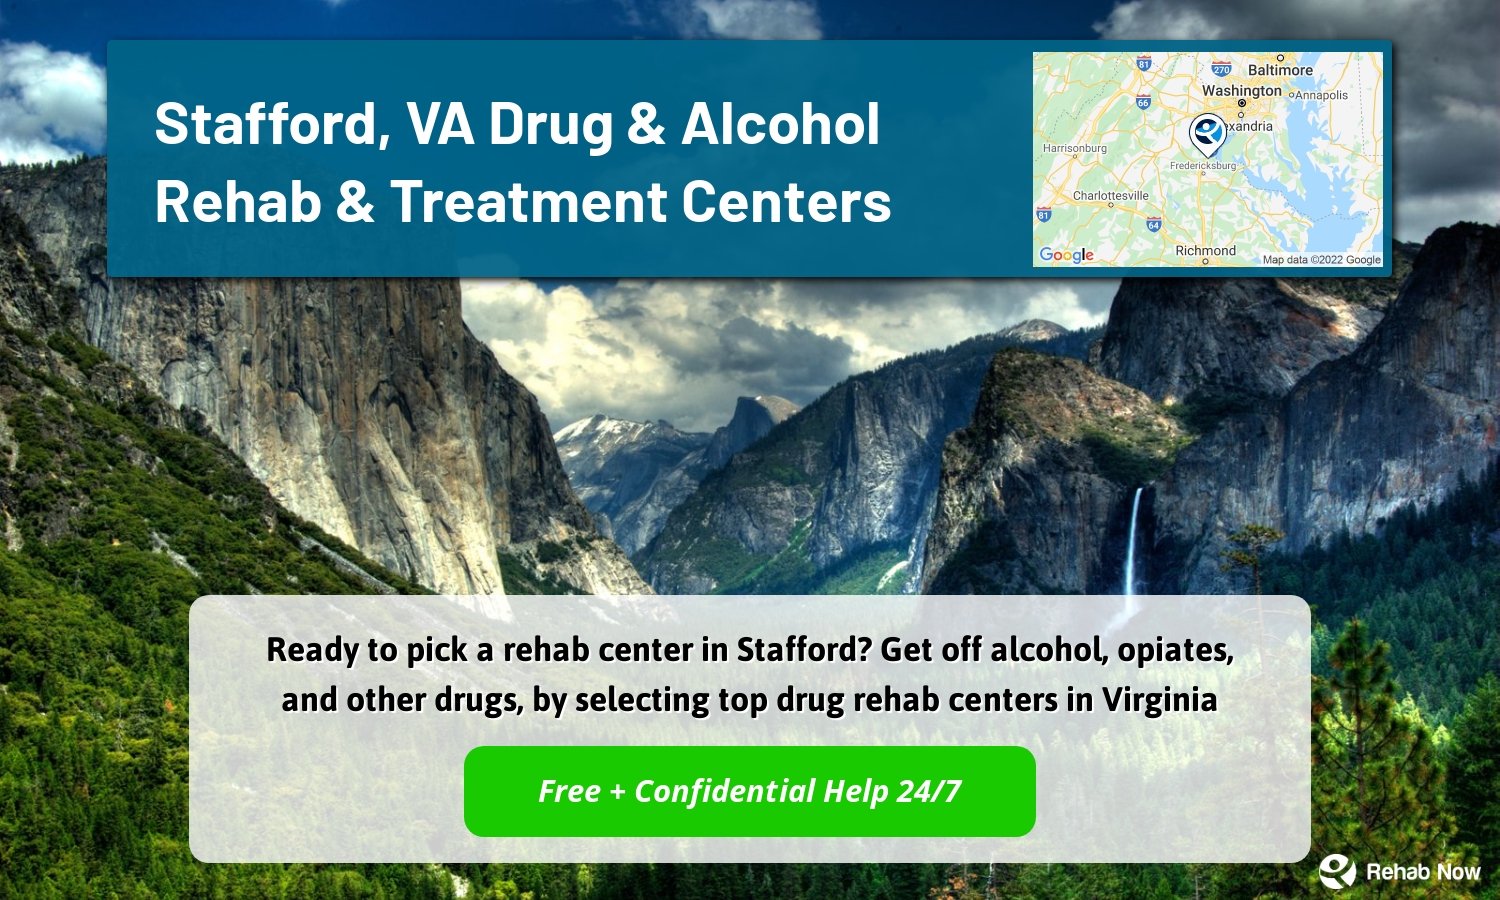 Ready to pick a rehab center in Stafford? Get off alcohol, opiates, and other drugs, by selecting top drug rehab centers in Virginia